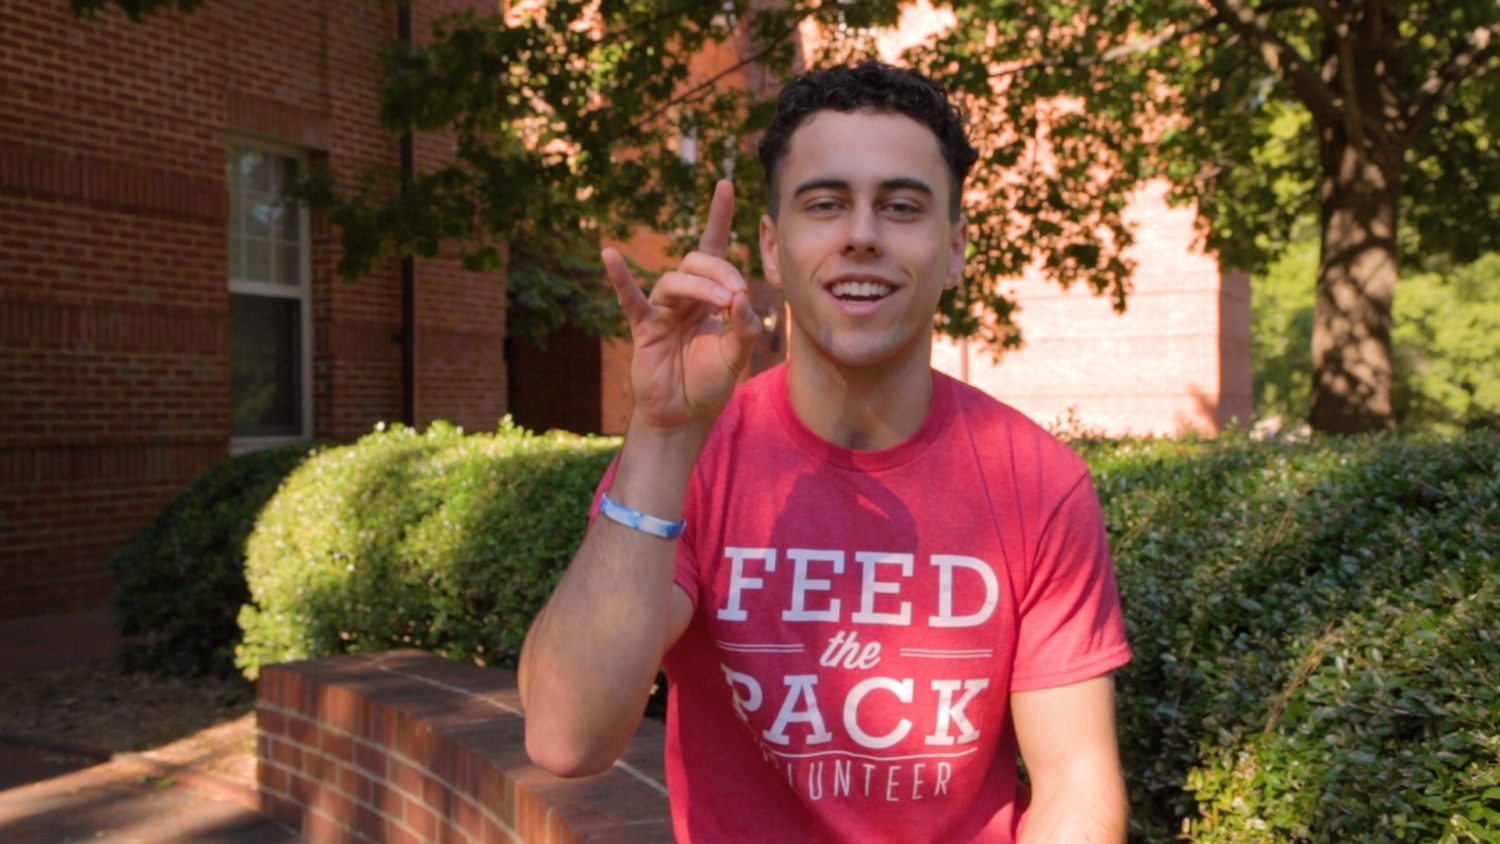 Cameron Morris does the wolfie in his Feed the Pack shirt